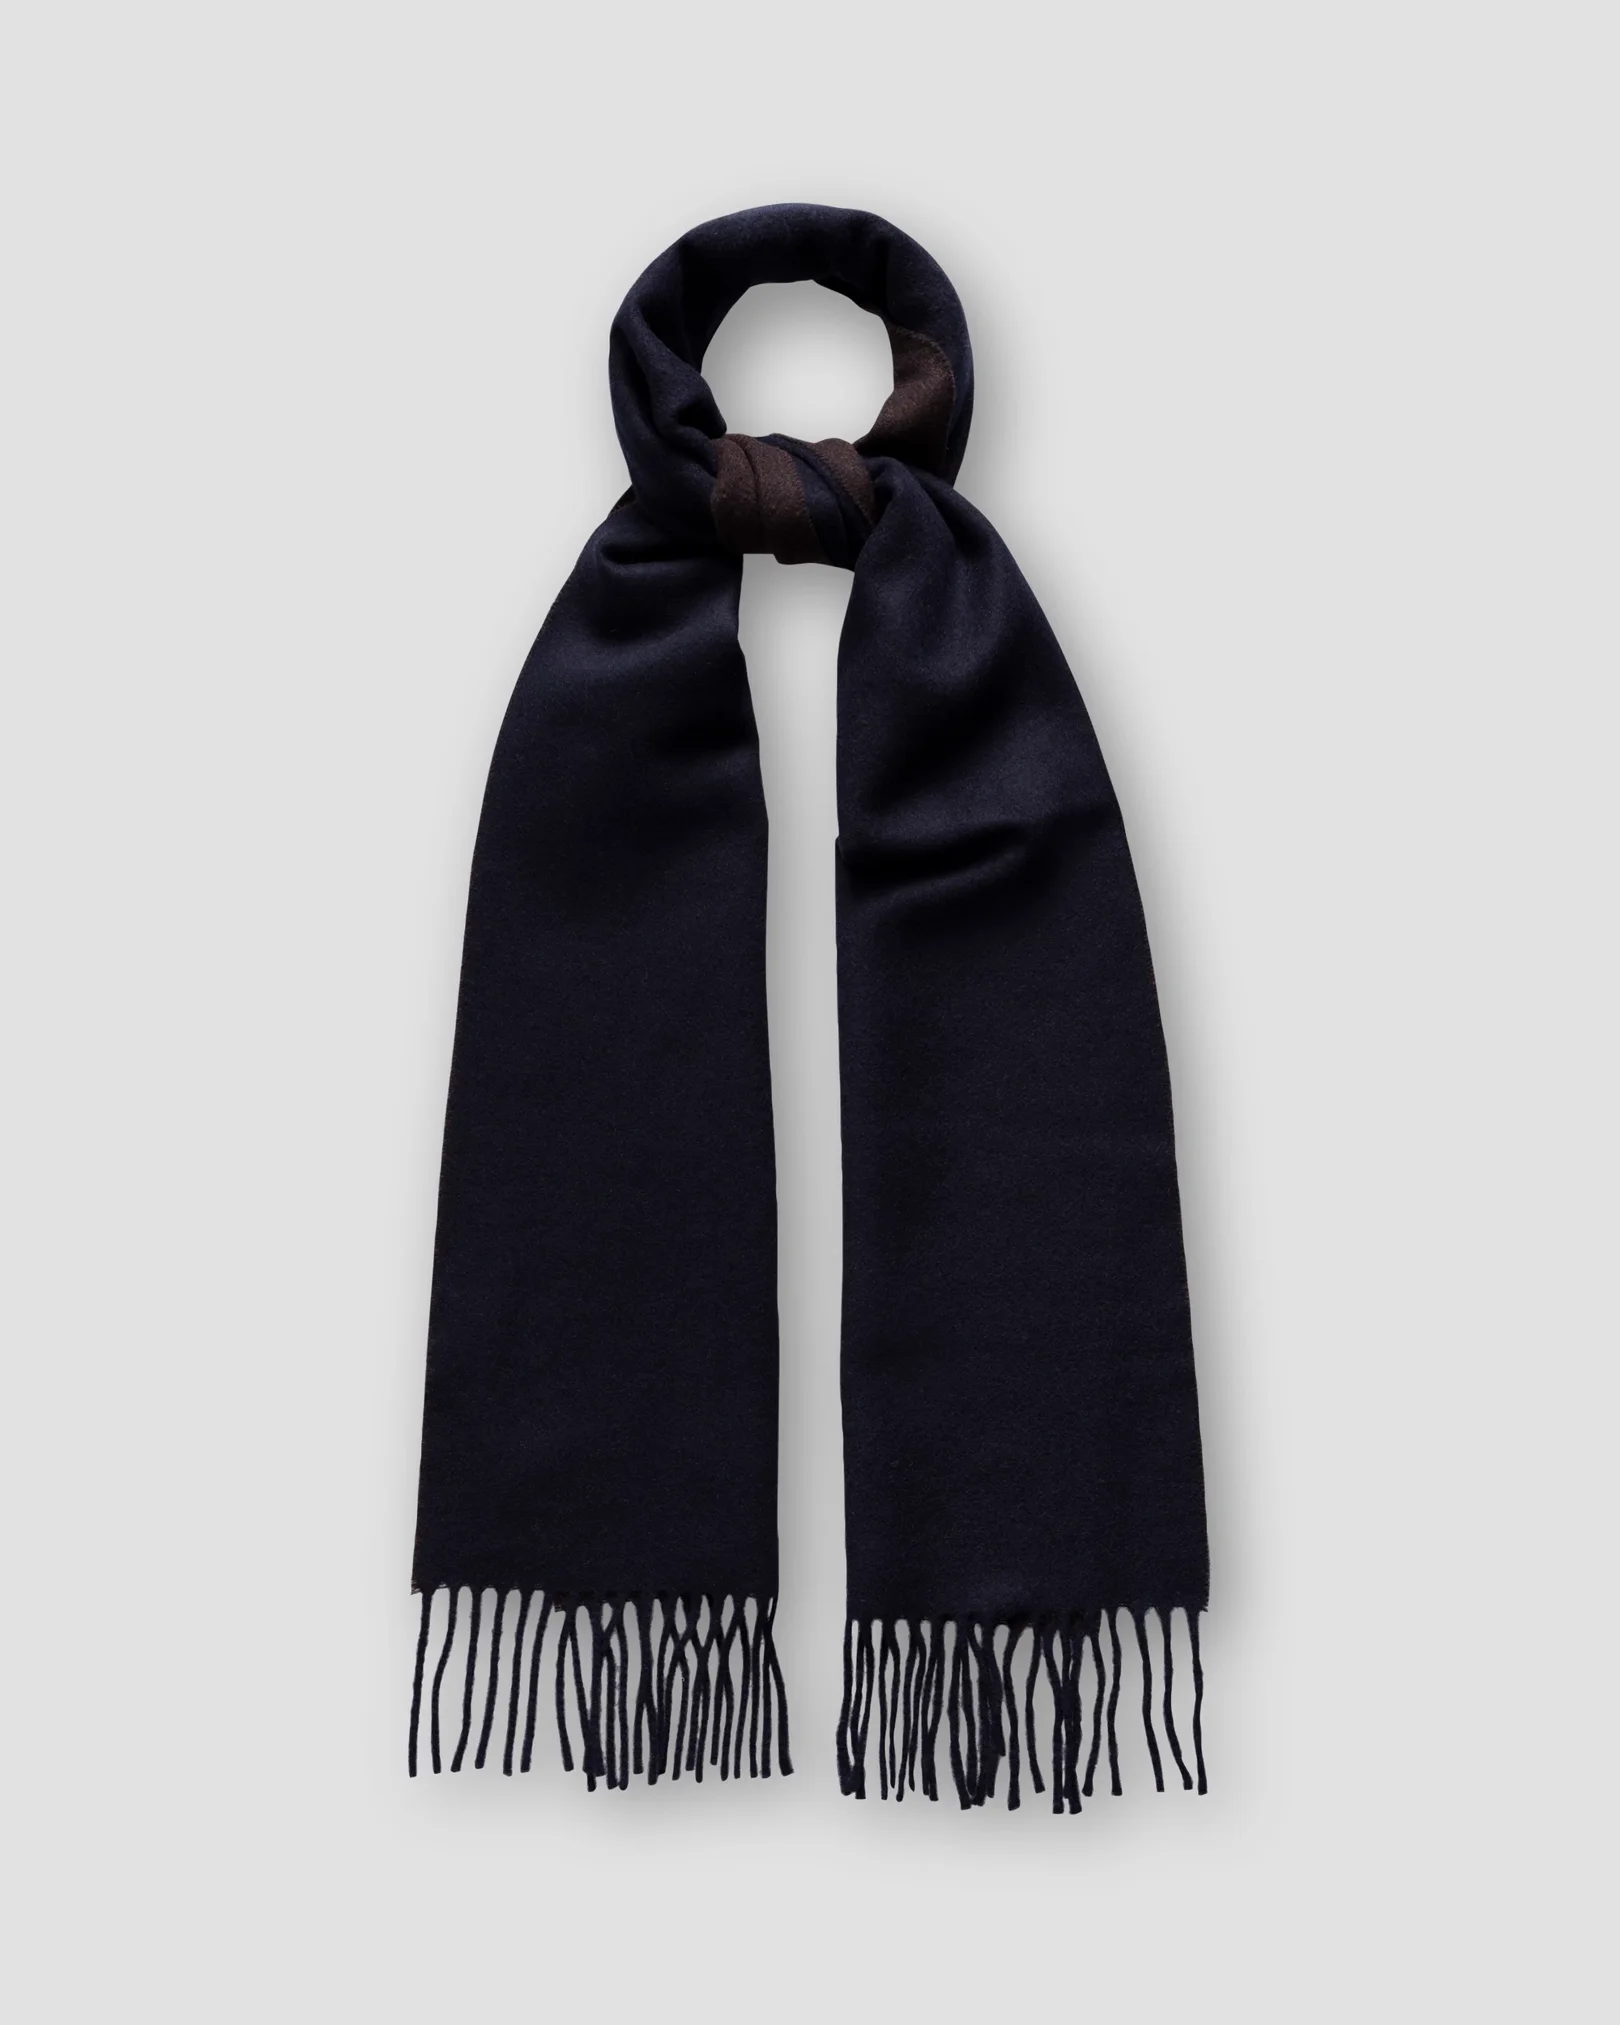 Eton - blue and brown double sided wool scarf